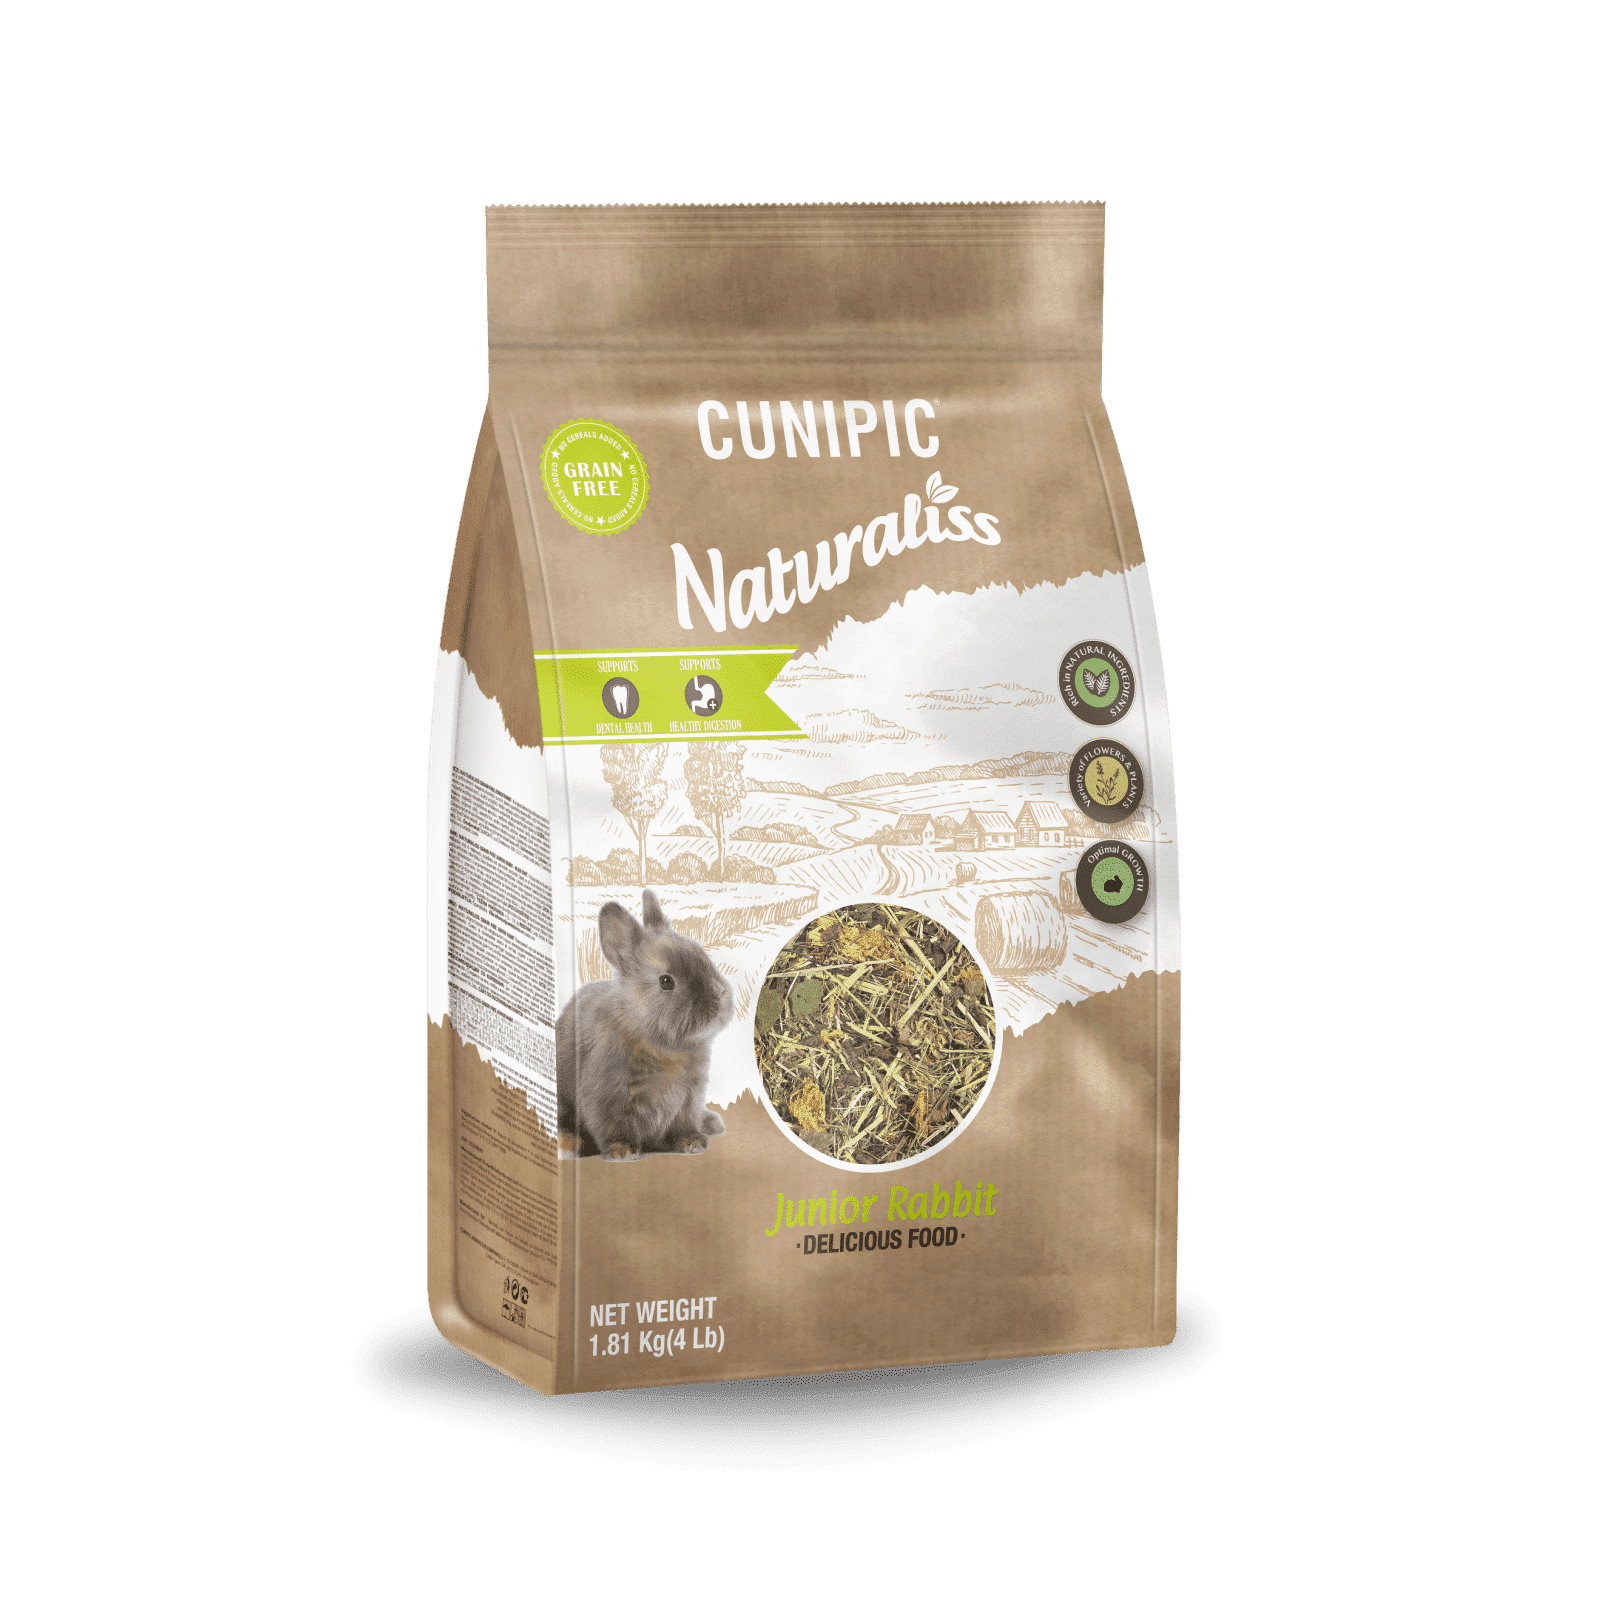 Naturaliss Conejo Baby 1.81kg - Cunipic